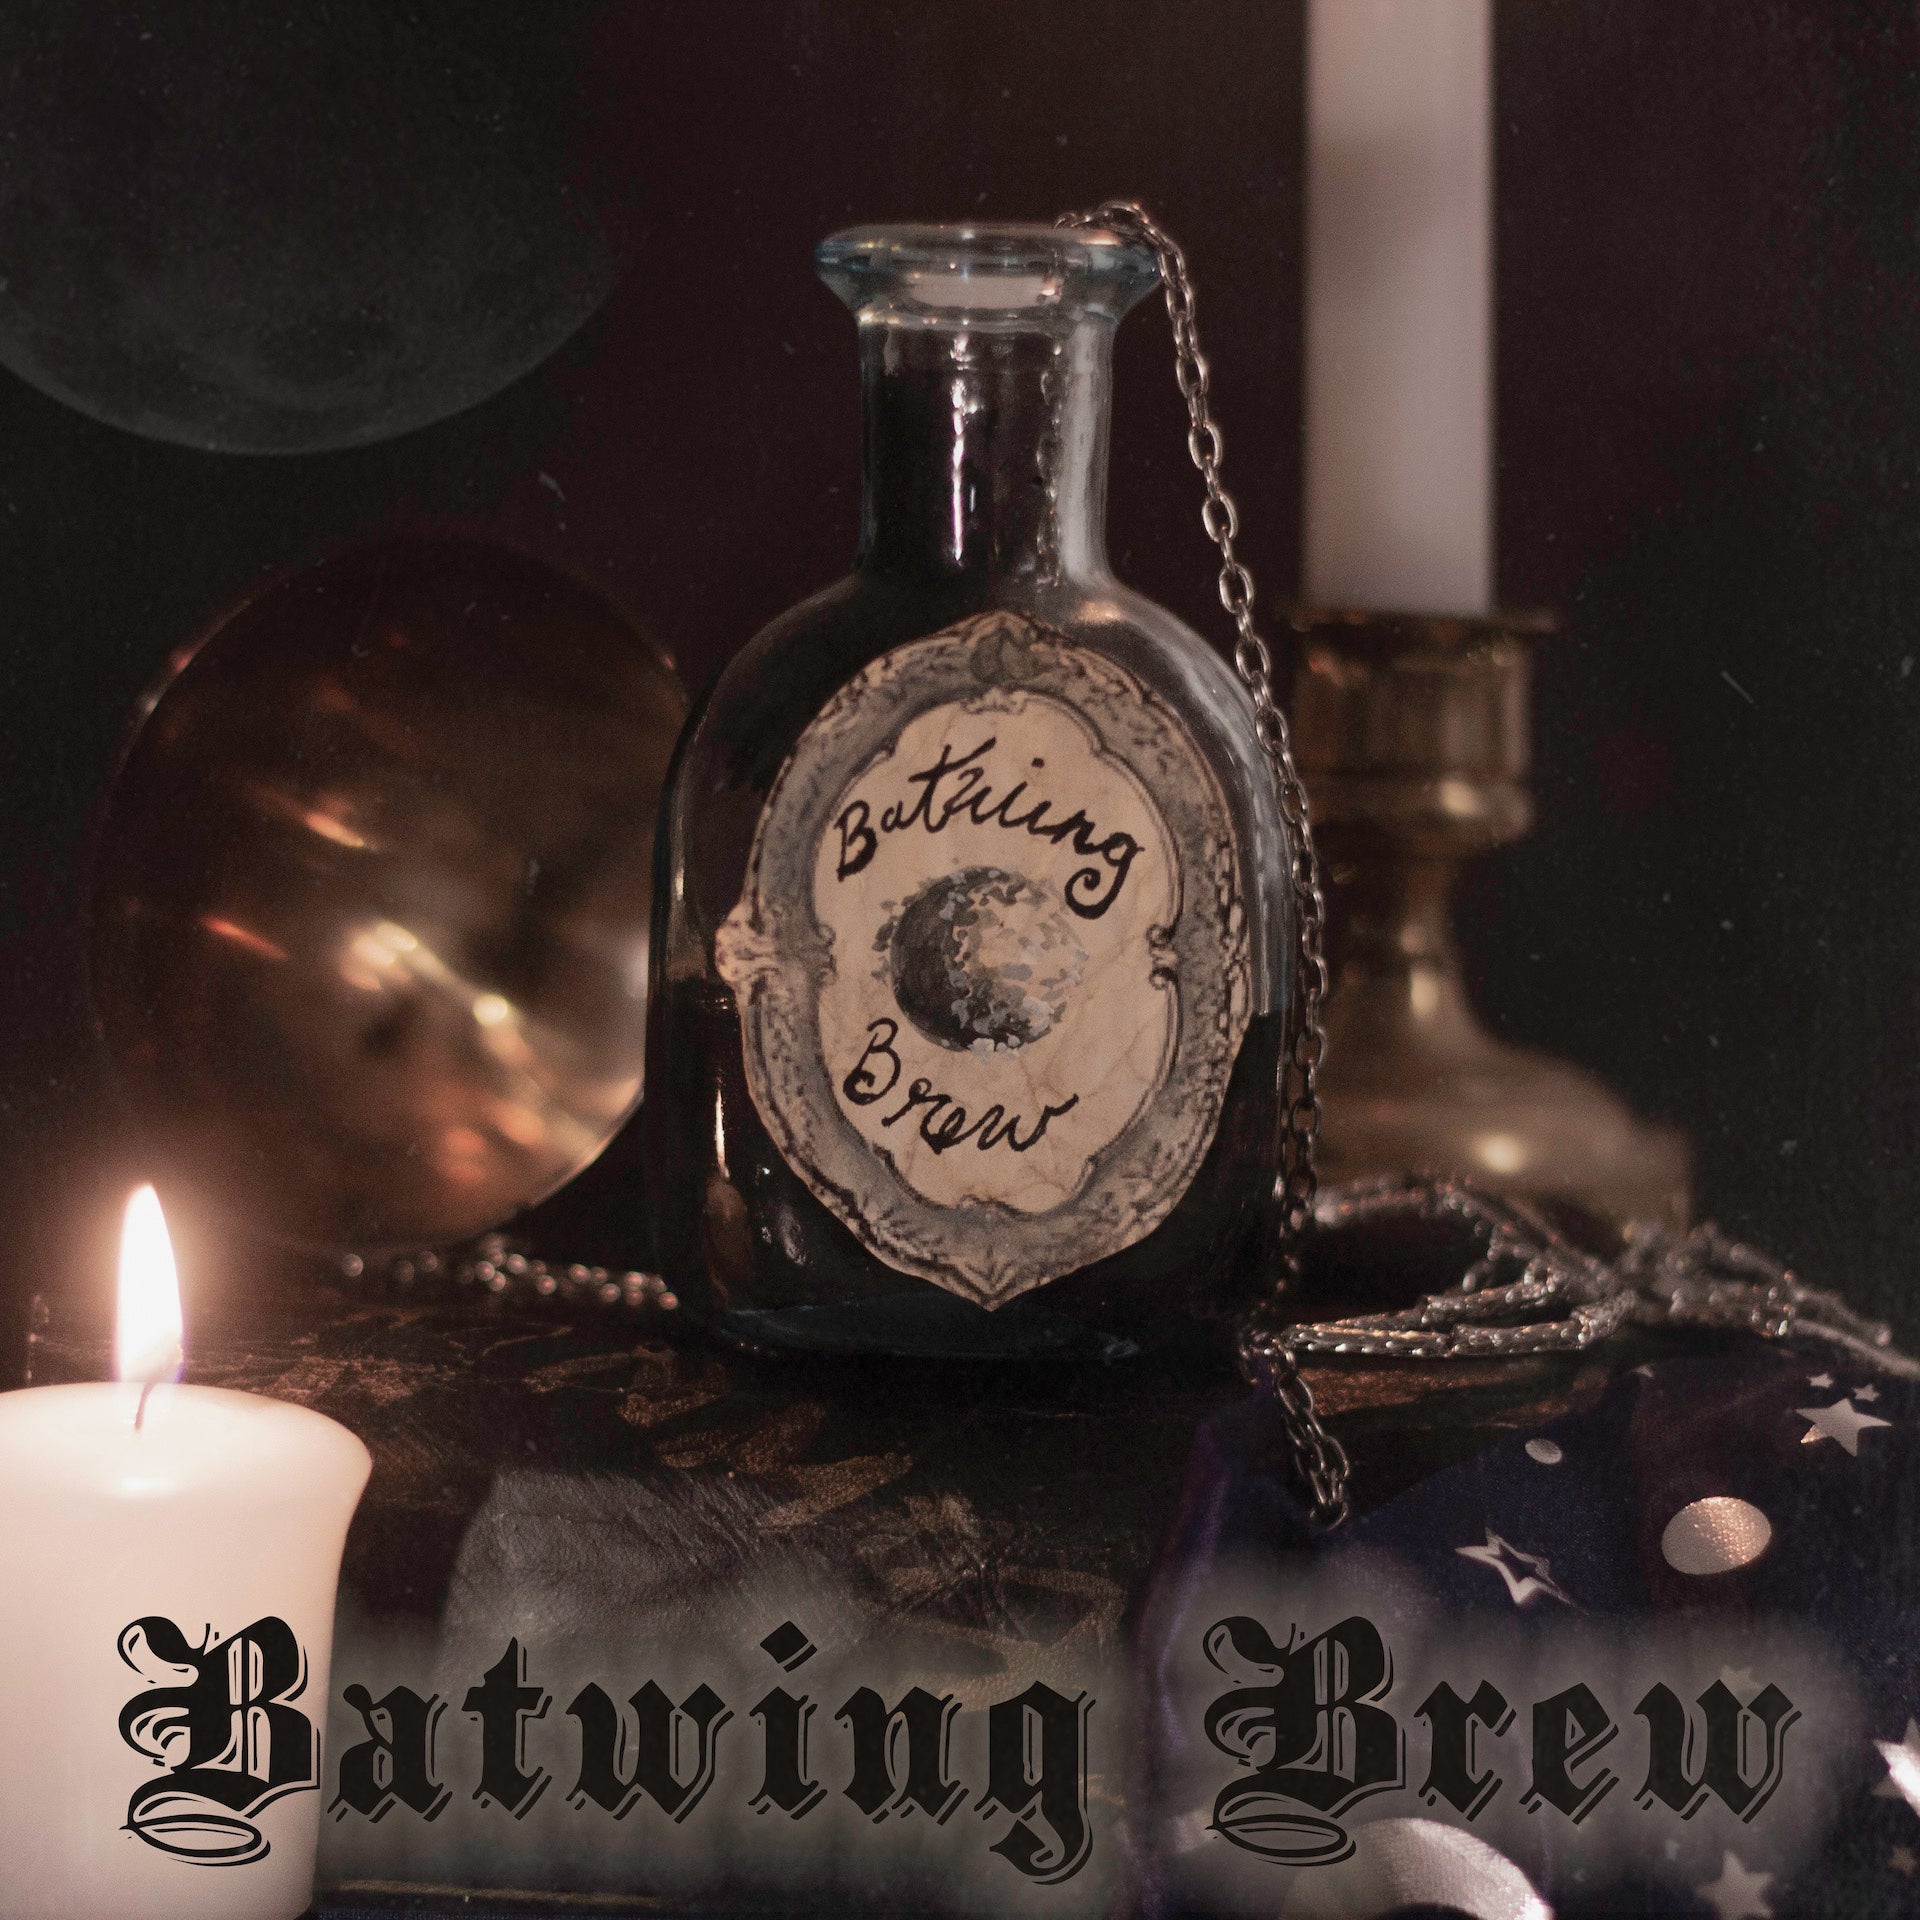 Batwing Brew - Stereoplasm